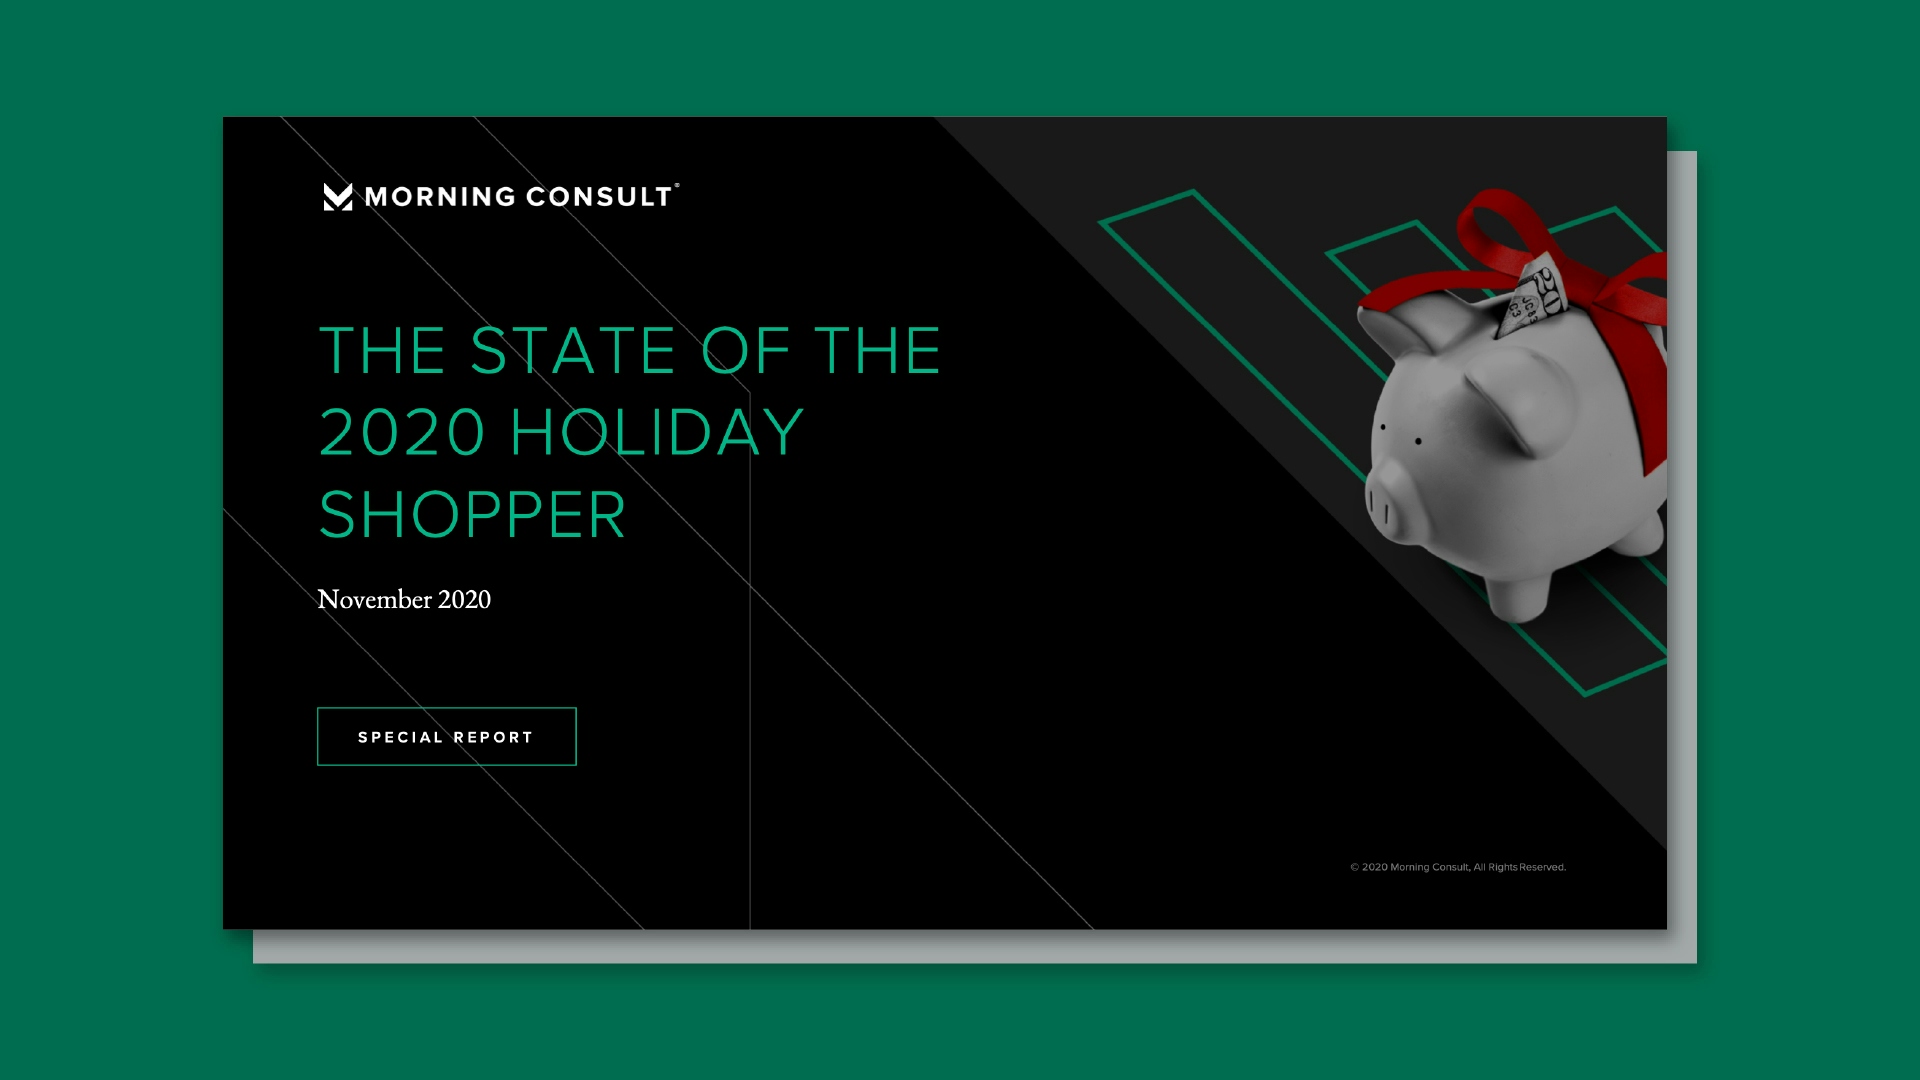 Download the State of the 2020 Holiday Shopper Report